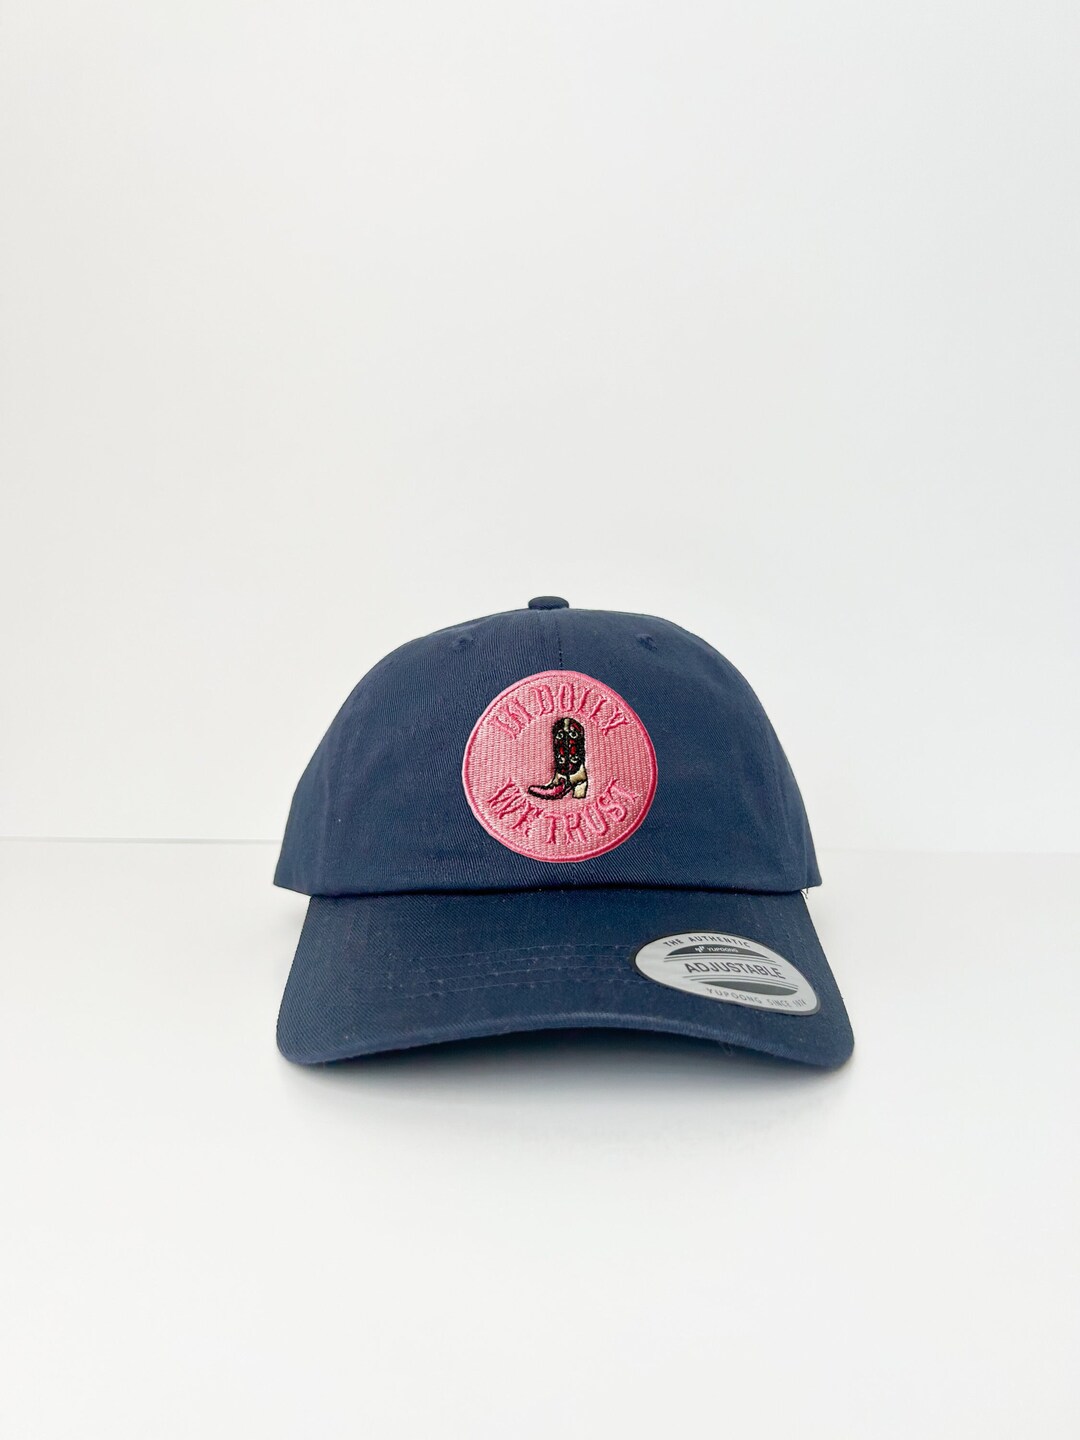 Dolly Parton Hat Navy Dad Hat With Embroidered Patch - Etsy